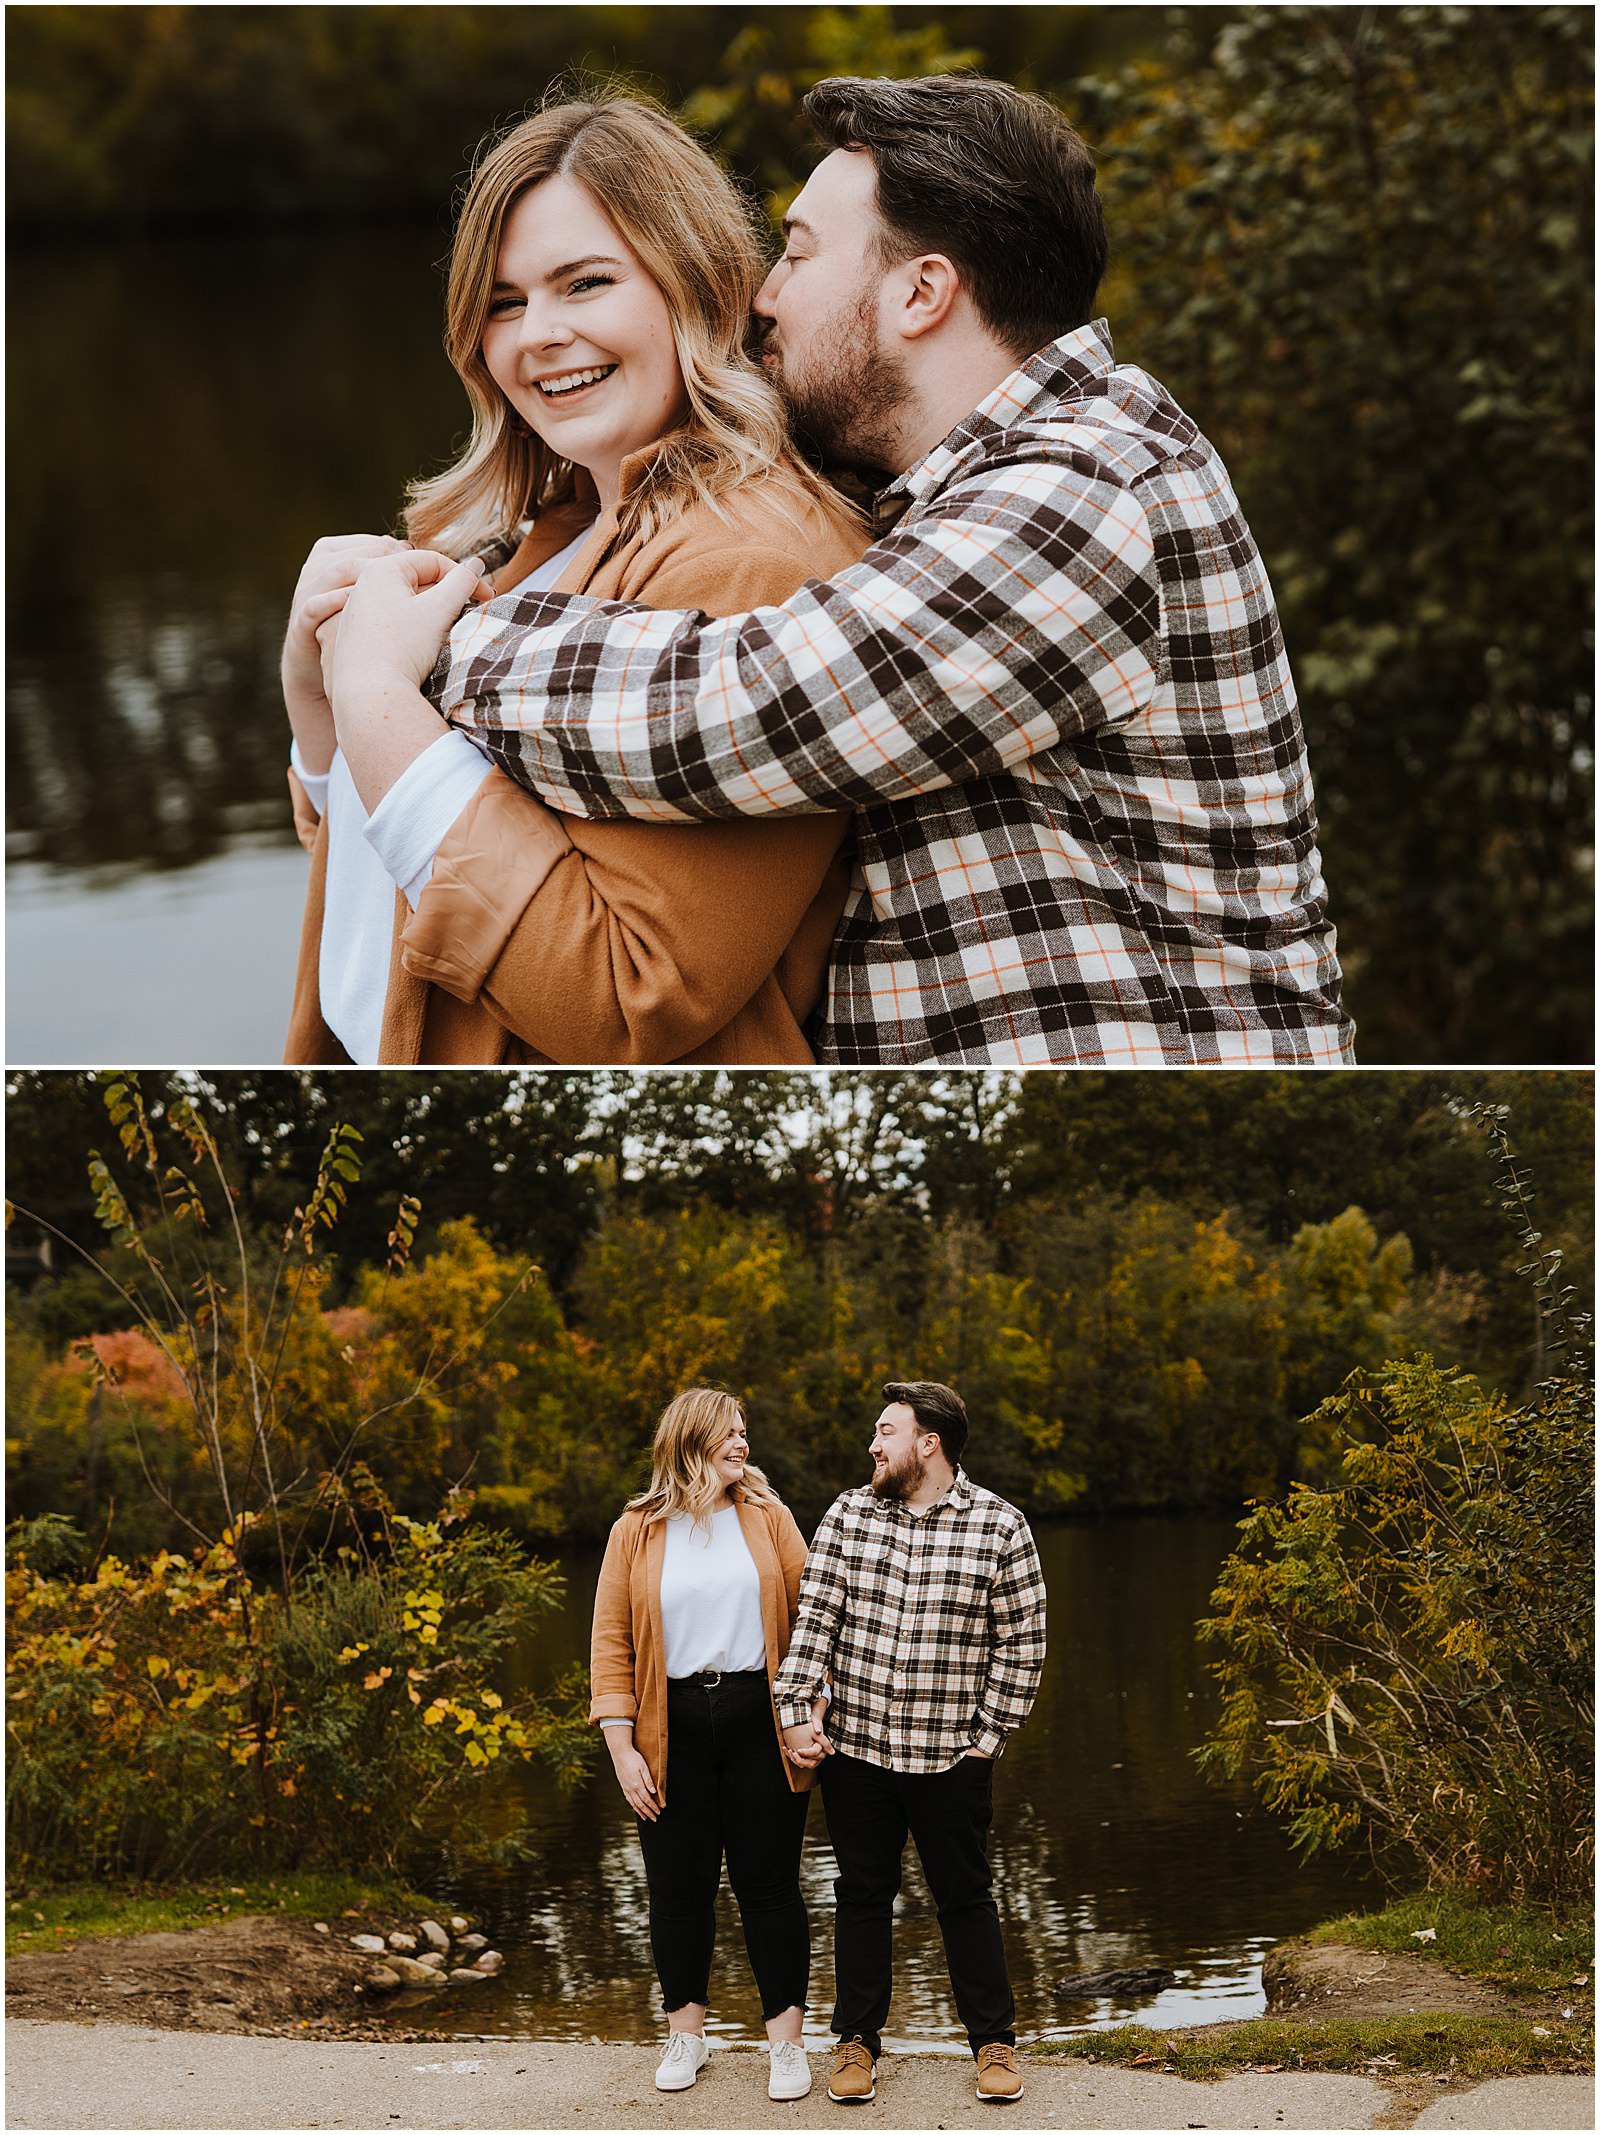 Fall Gallup Park Engagement Session